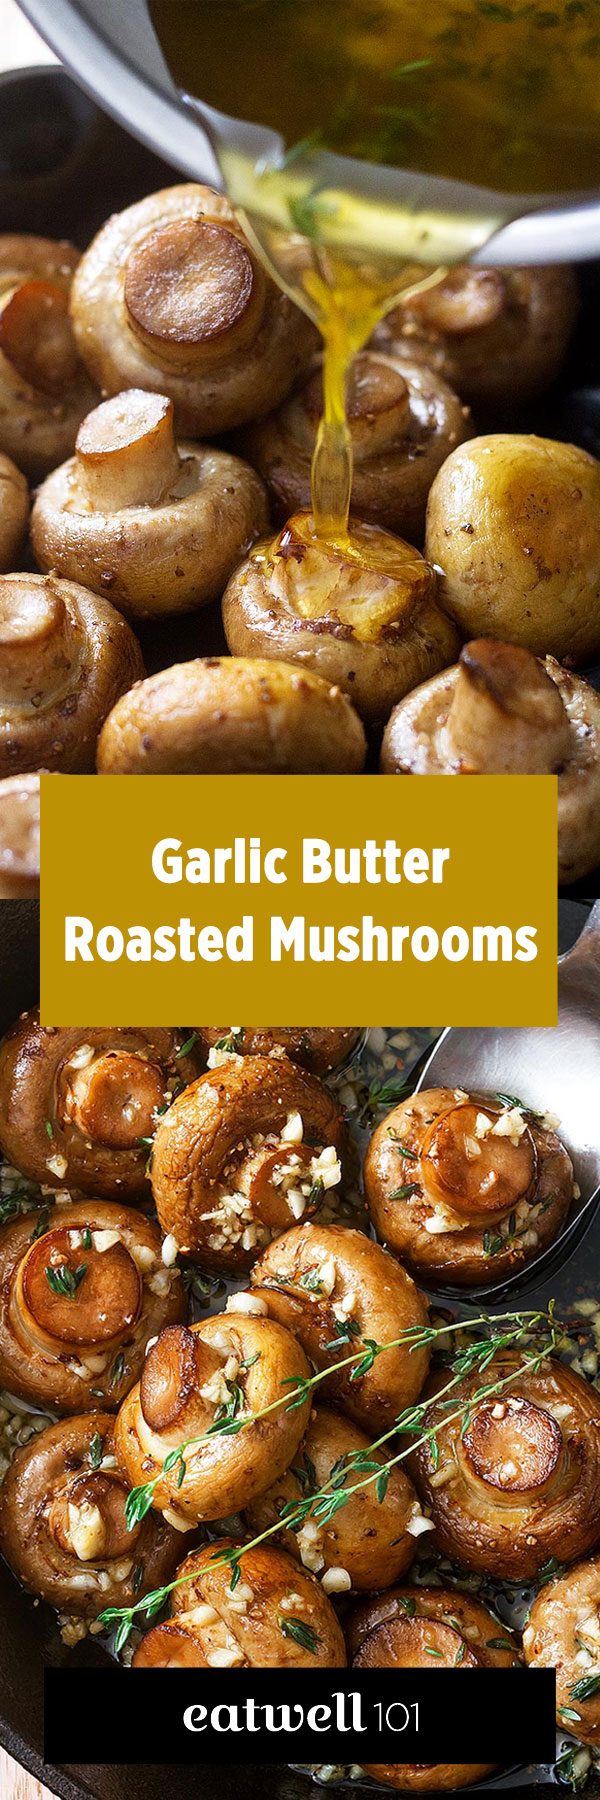 Roasted Mushrooms with Garlic Butter Sauce  - #sidedish #eatwell101 #recipe - A great side dish everyone will love.